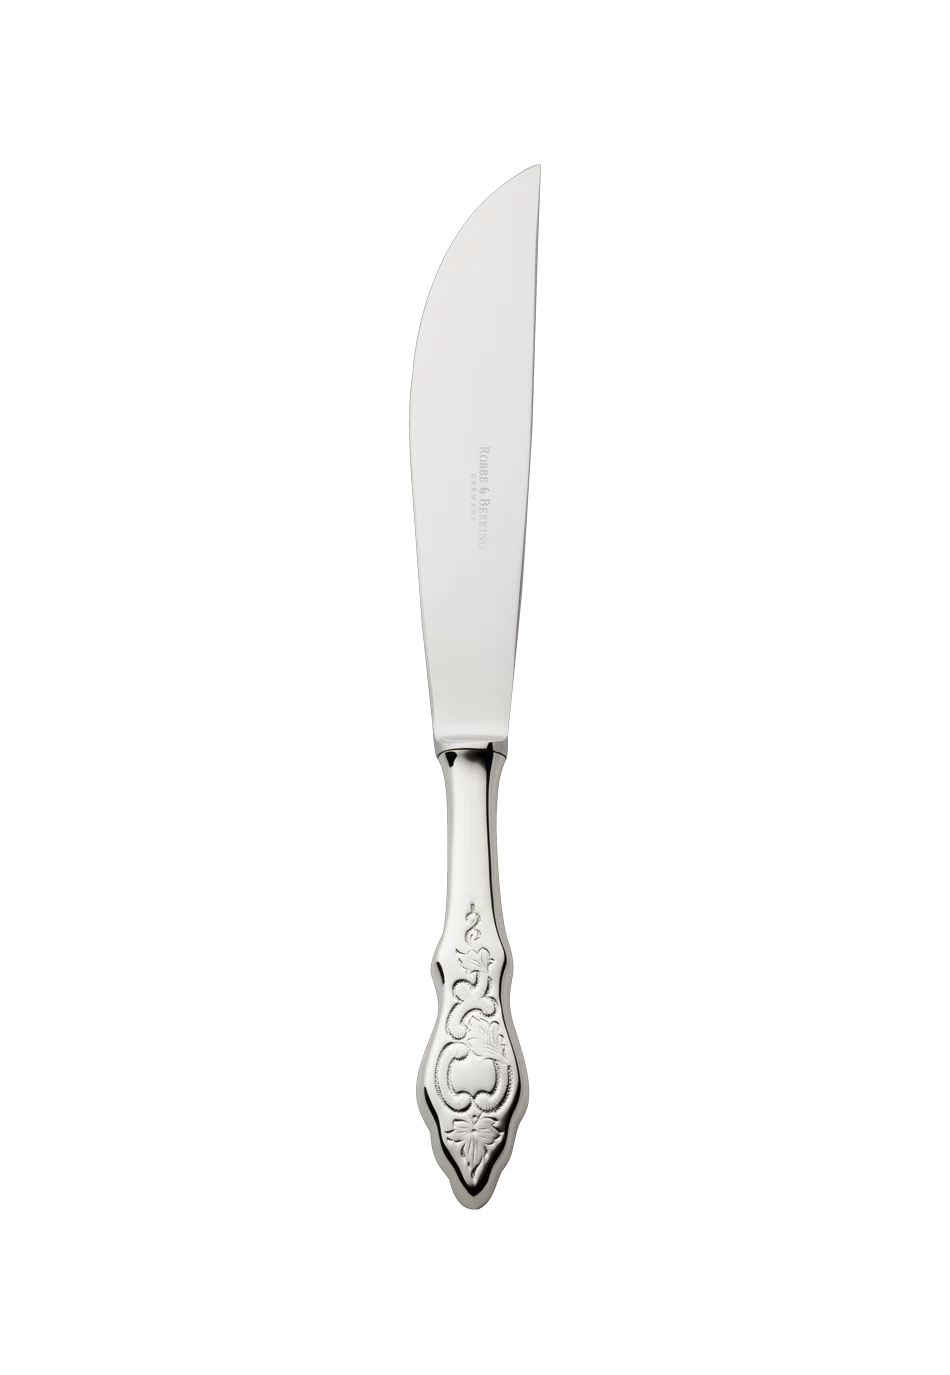 Ostfriesen Carving Knife (150g massive silverplated)